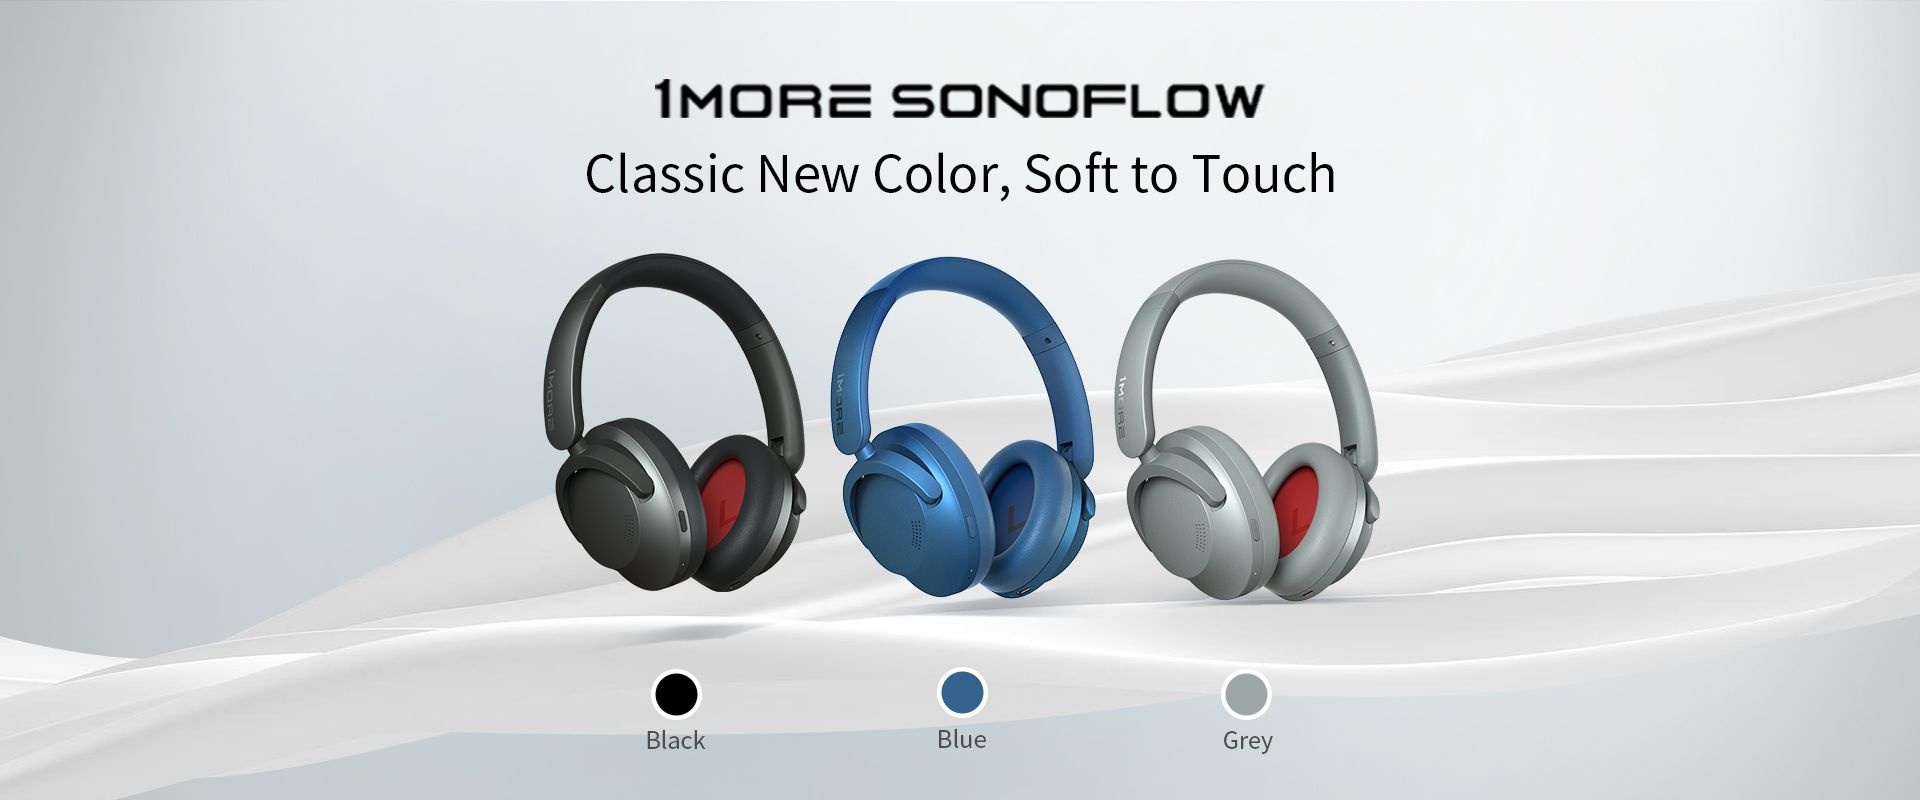 1MORE-SonoFlow-Active-Noise-Cancelling-Headphones-Bluetooth-Headphones-with-LDAC-for-Hi-Res-Wireless-Audio-70H-Playtime-Clear-Calls-Silver-15